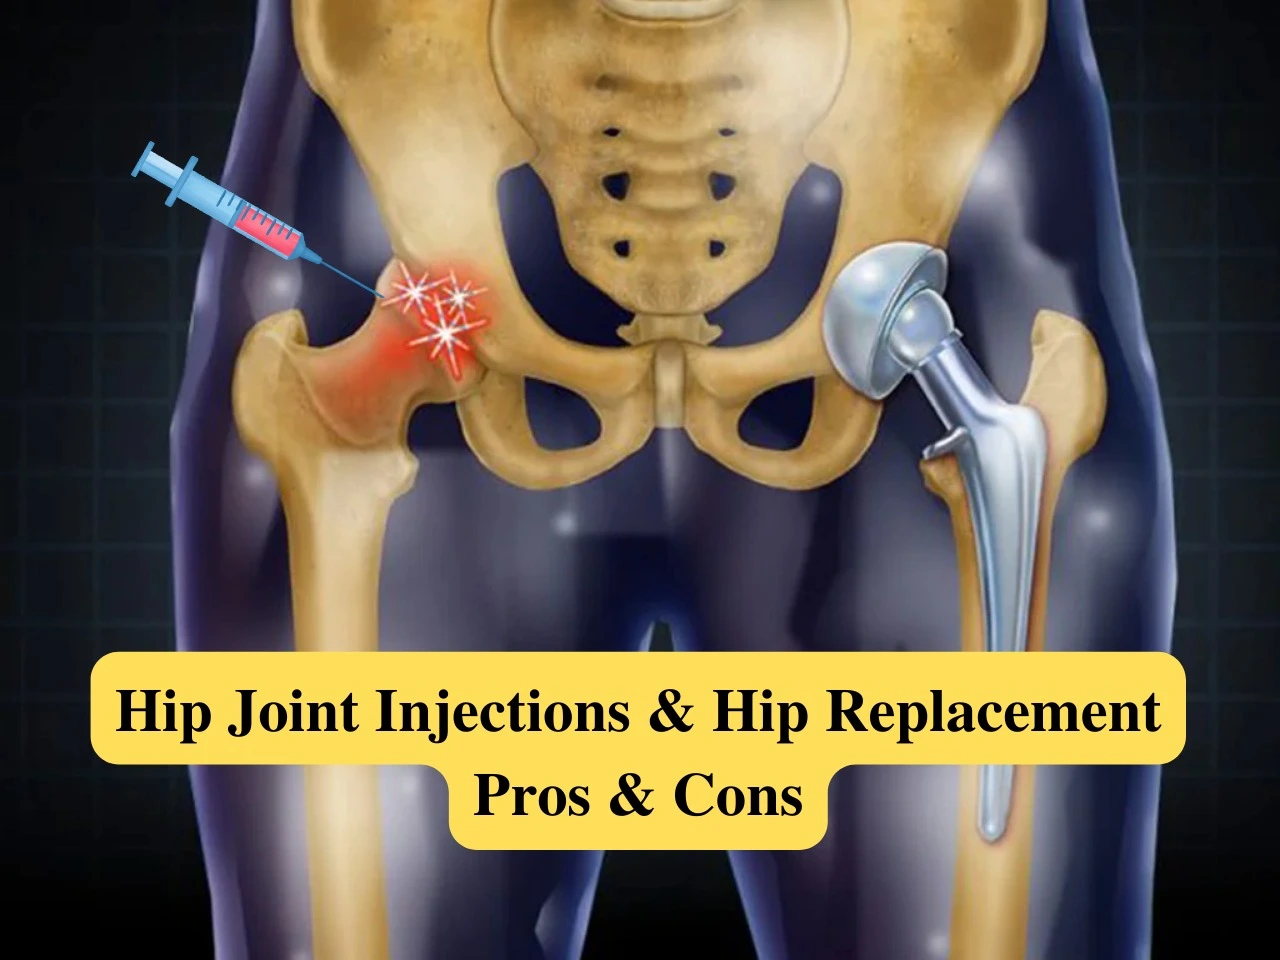 Hip Joint Injections & Hip Replacement Pros & Cons